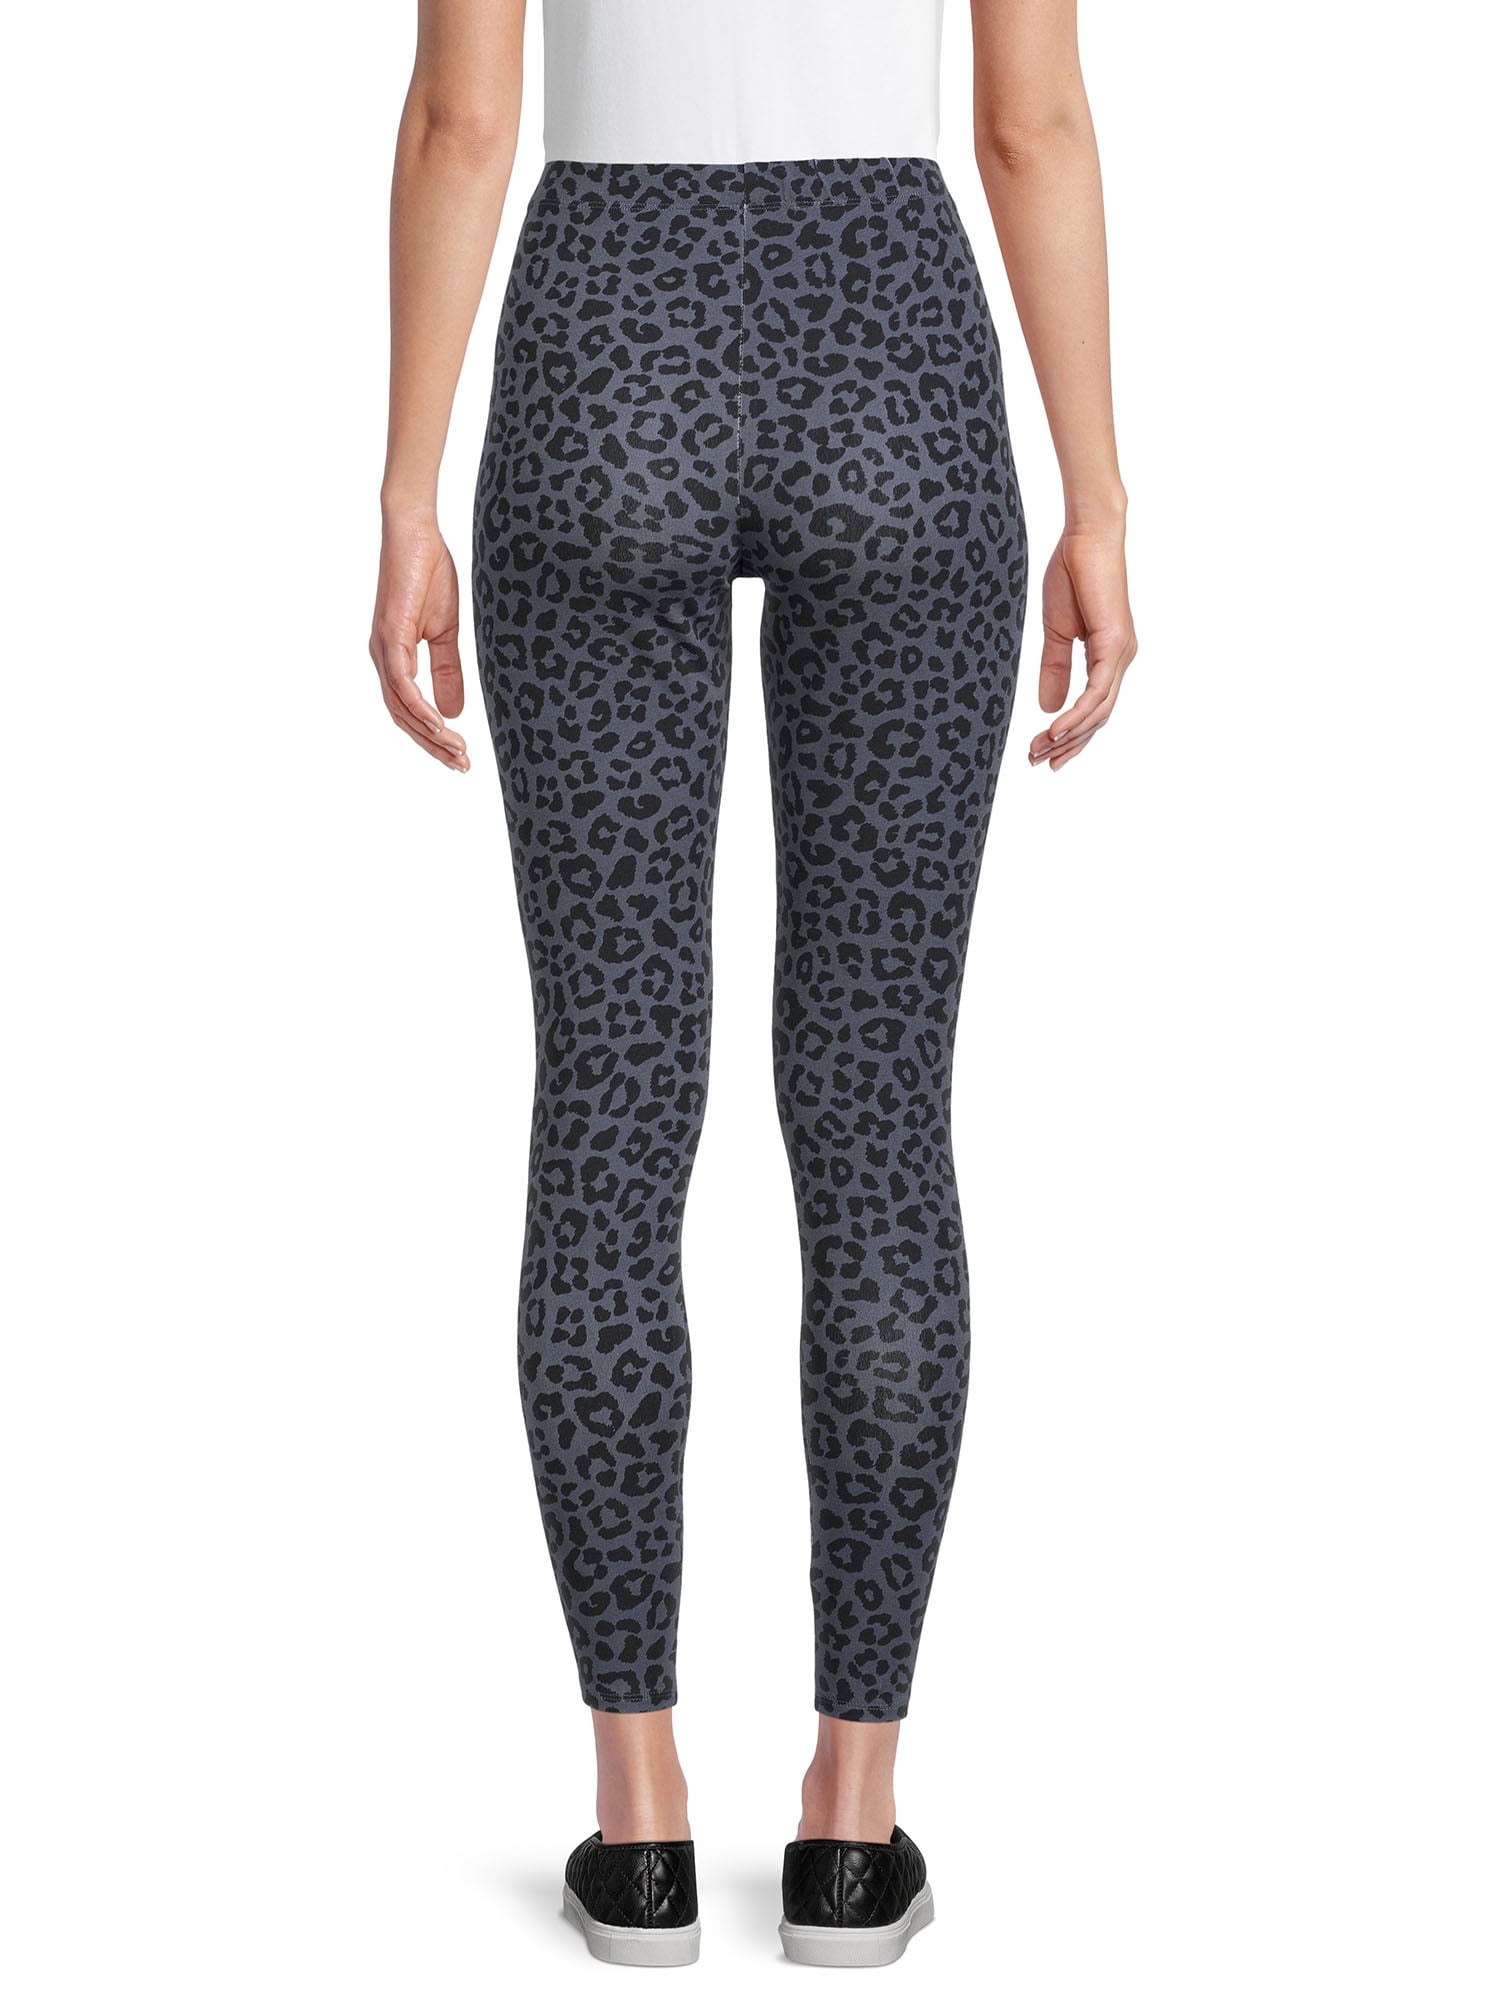 Catherine on X: No Boundaries Juniors Ankle Leggings -- 2-Pack. Size:  Small to 3XL. 42 color/print options. Now $11.00 (was $15.96) Walmart:   (ad)  / X